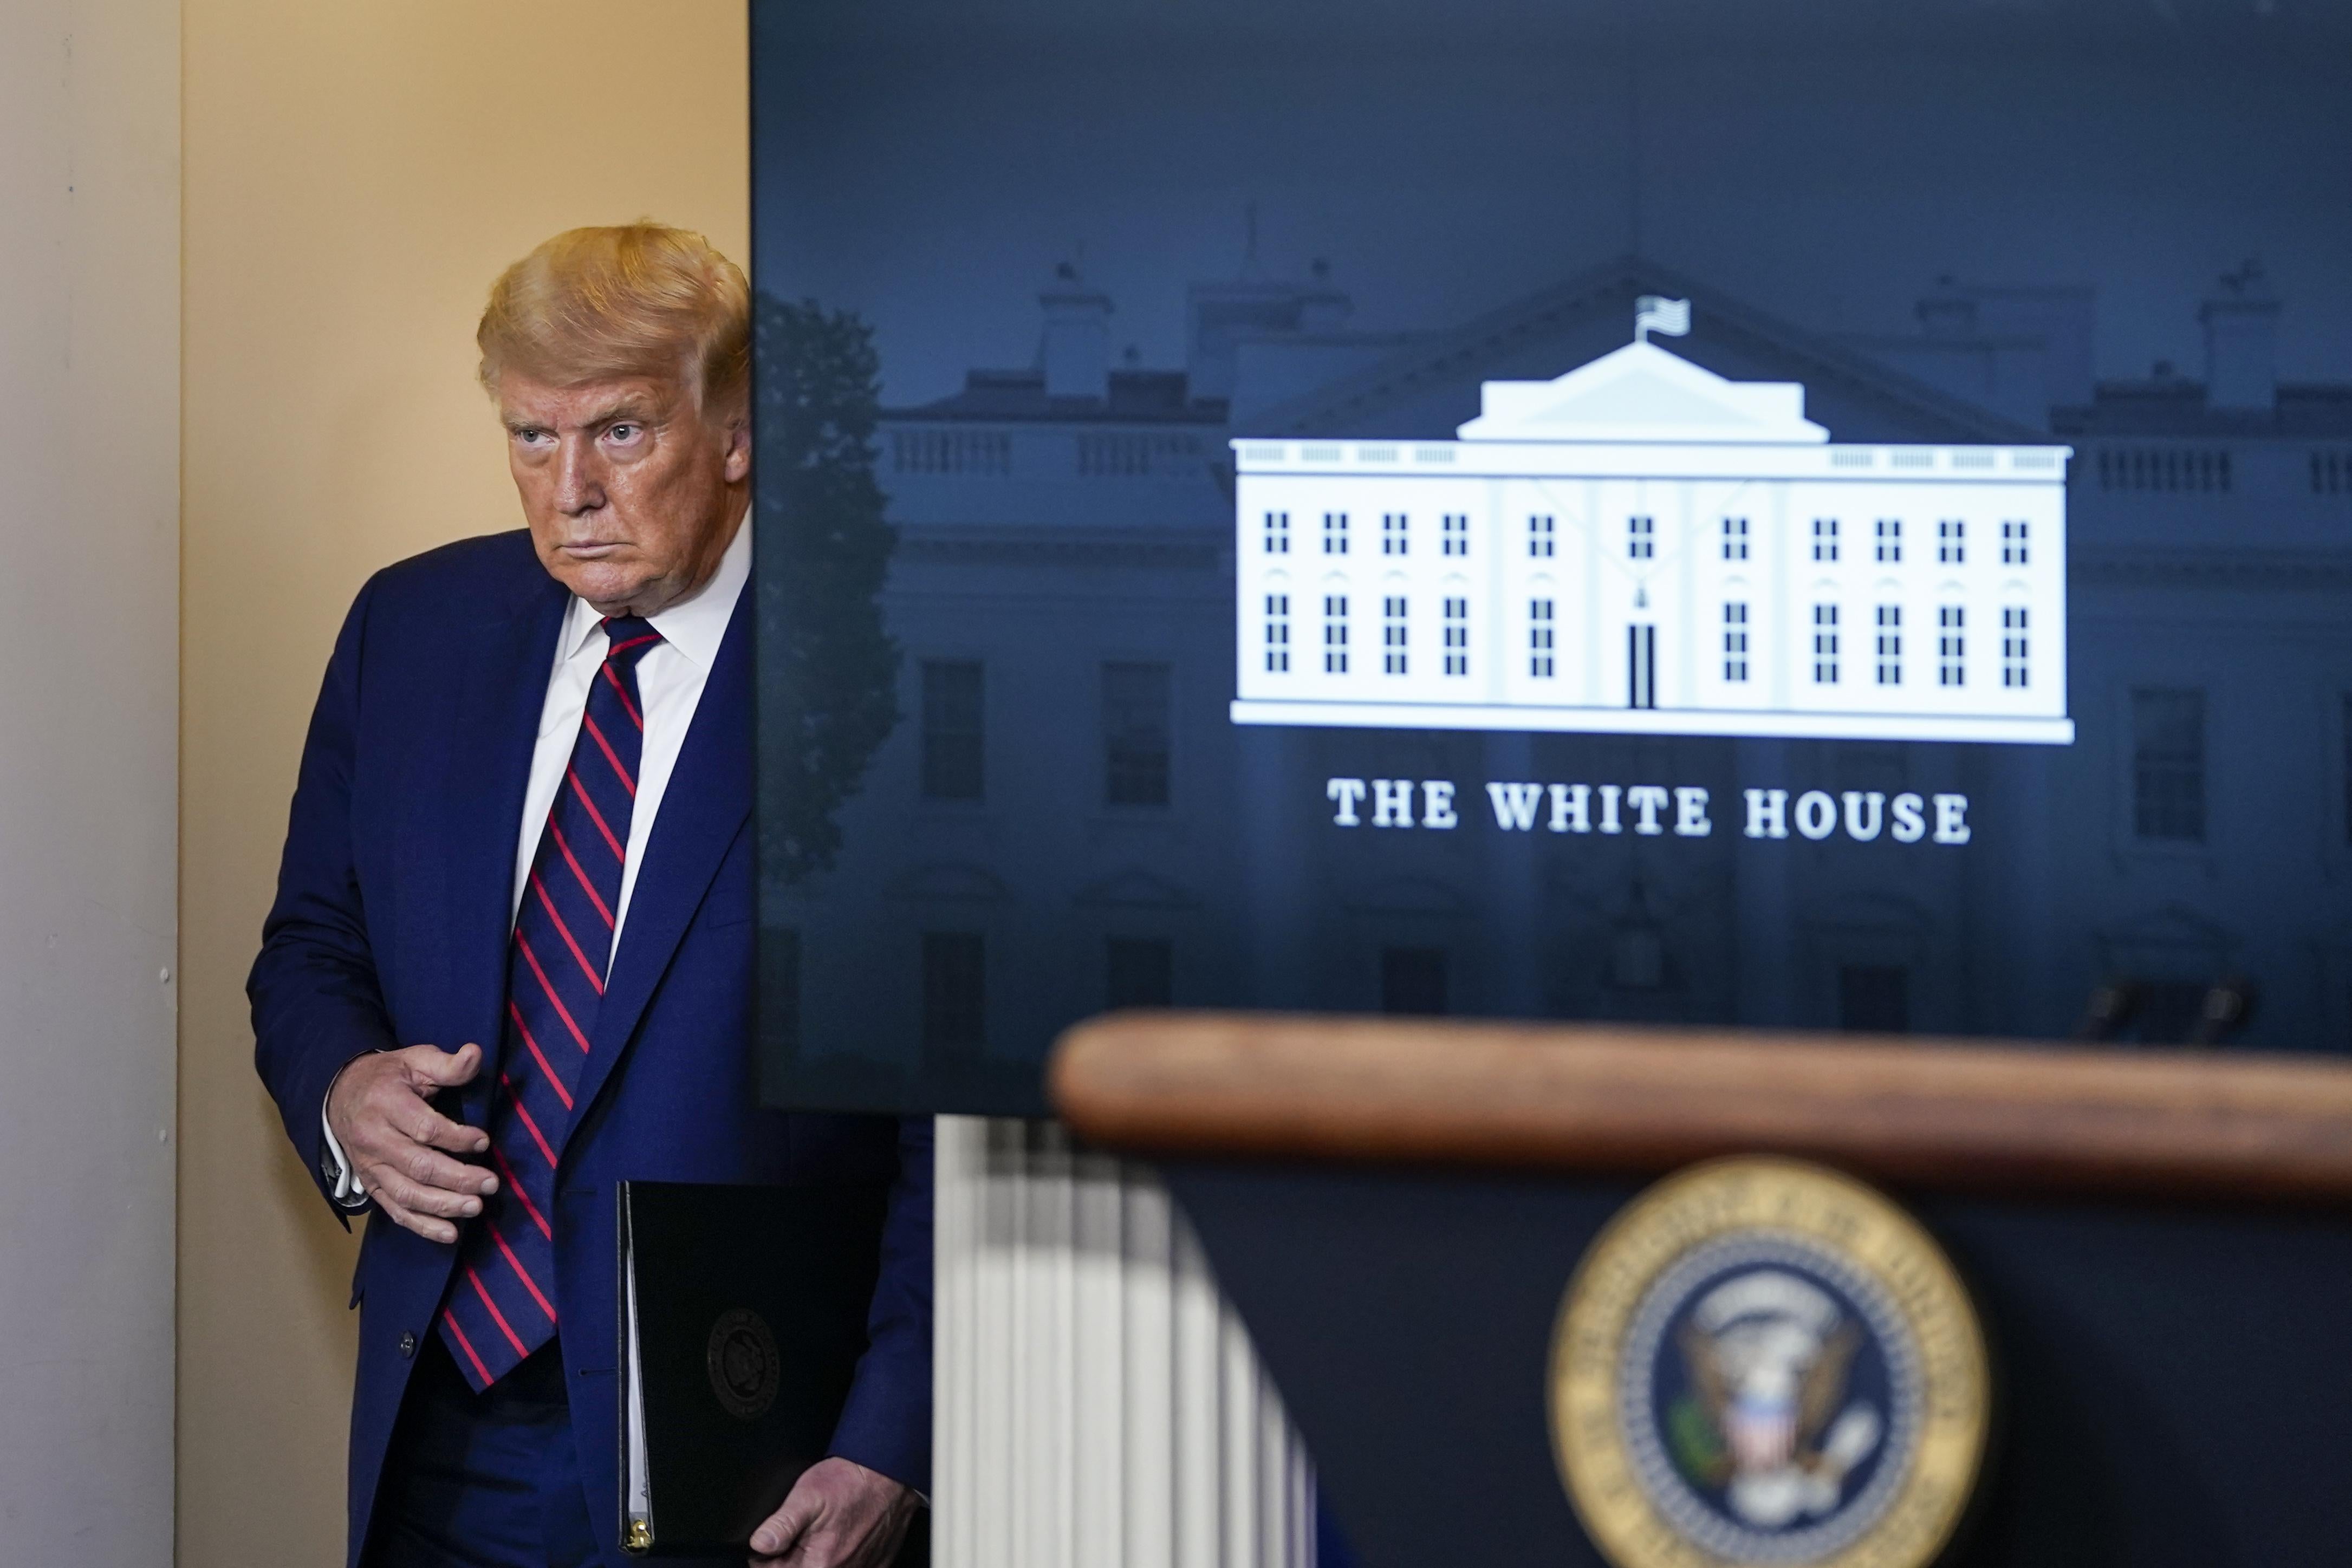 President Donald Trump arrives for a news conference the White House on September 4, 2020 in Washington, D.C.